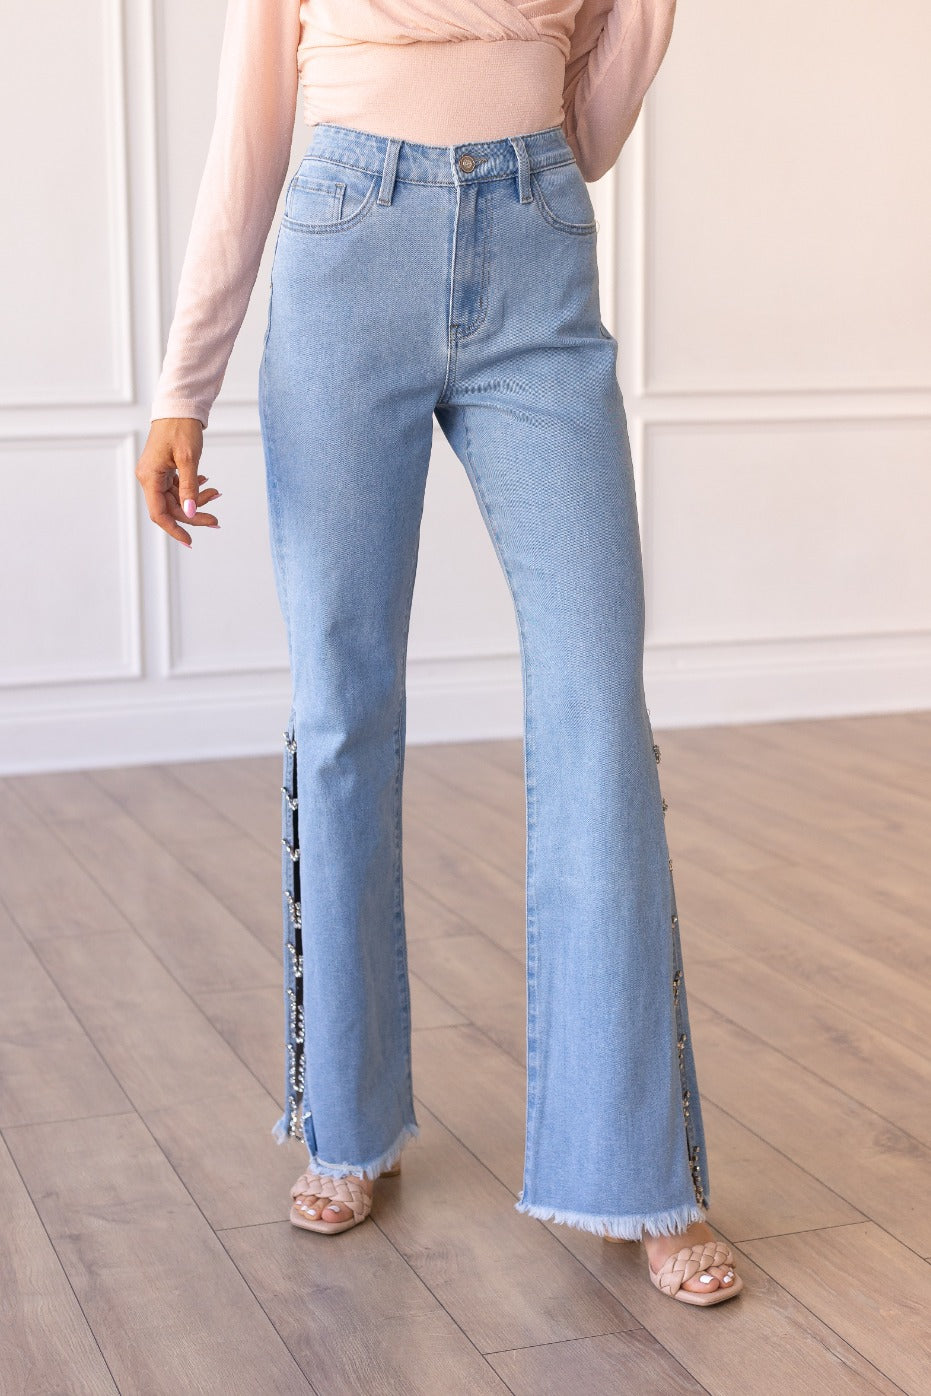 The Lara Light Wash Jeans with Crystal Chain Detail